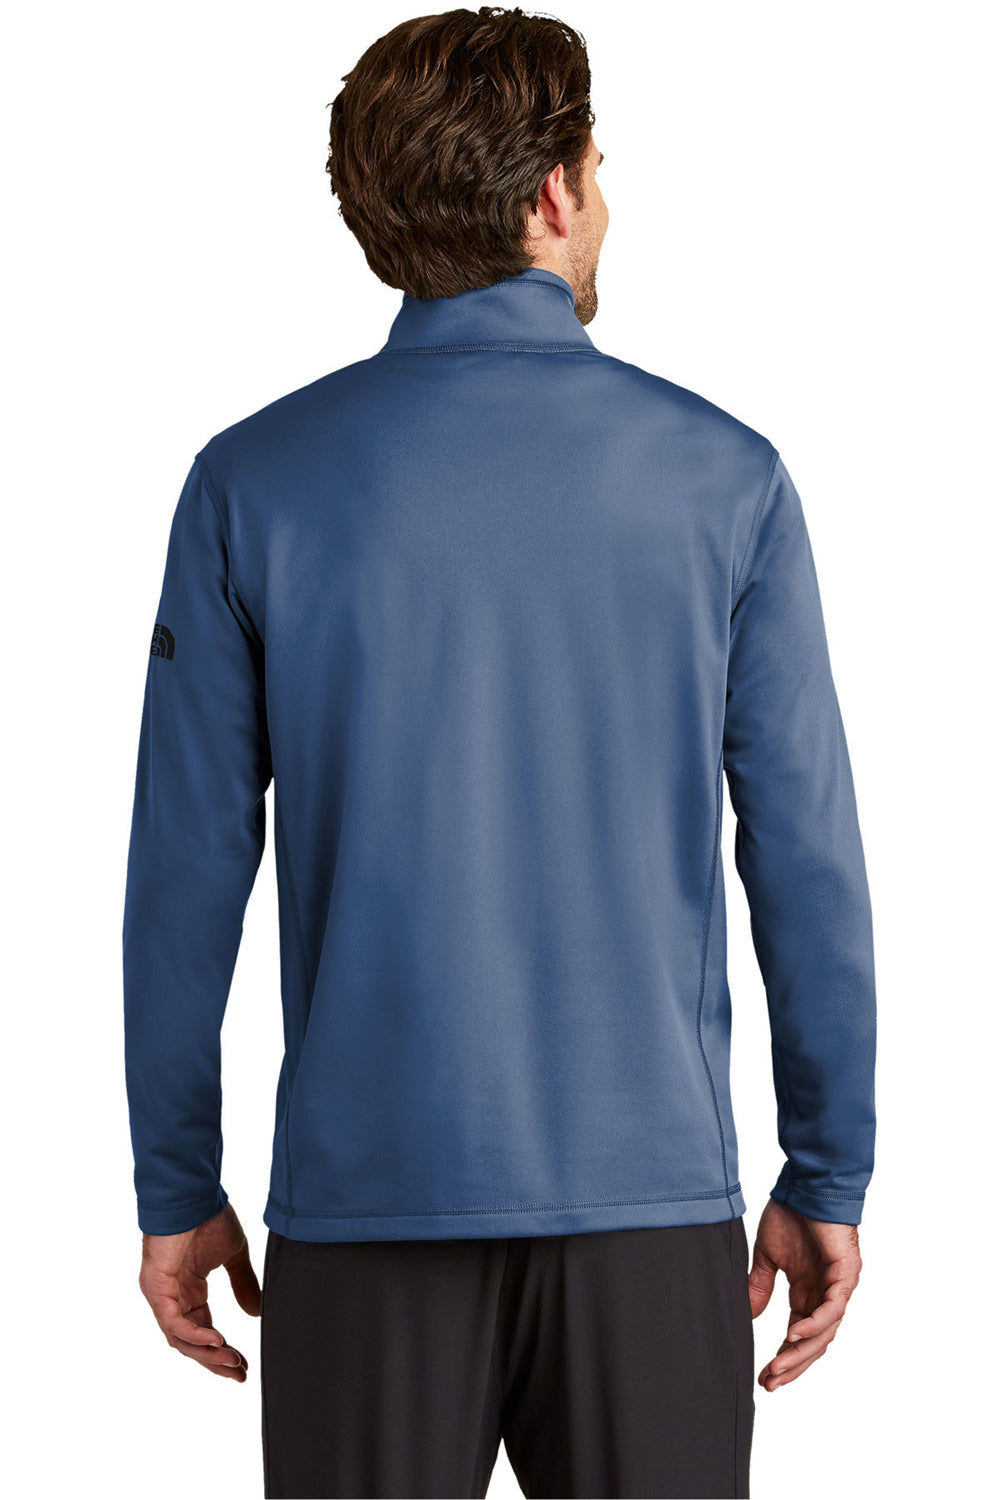 The North Face NF0A3LHB Mens Tech 1/4 Zip Fleece Jacket Blue Wing Back